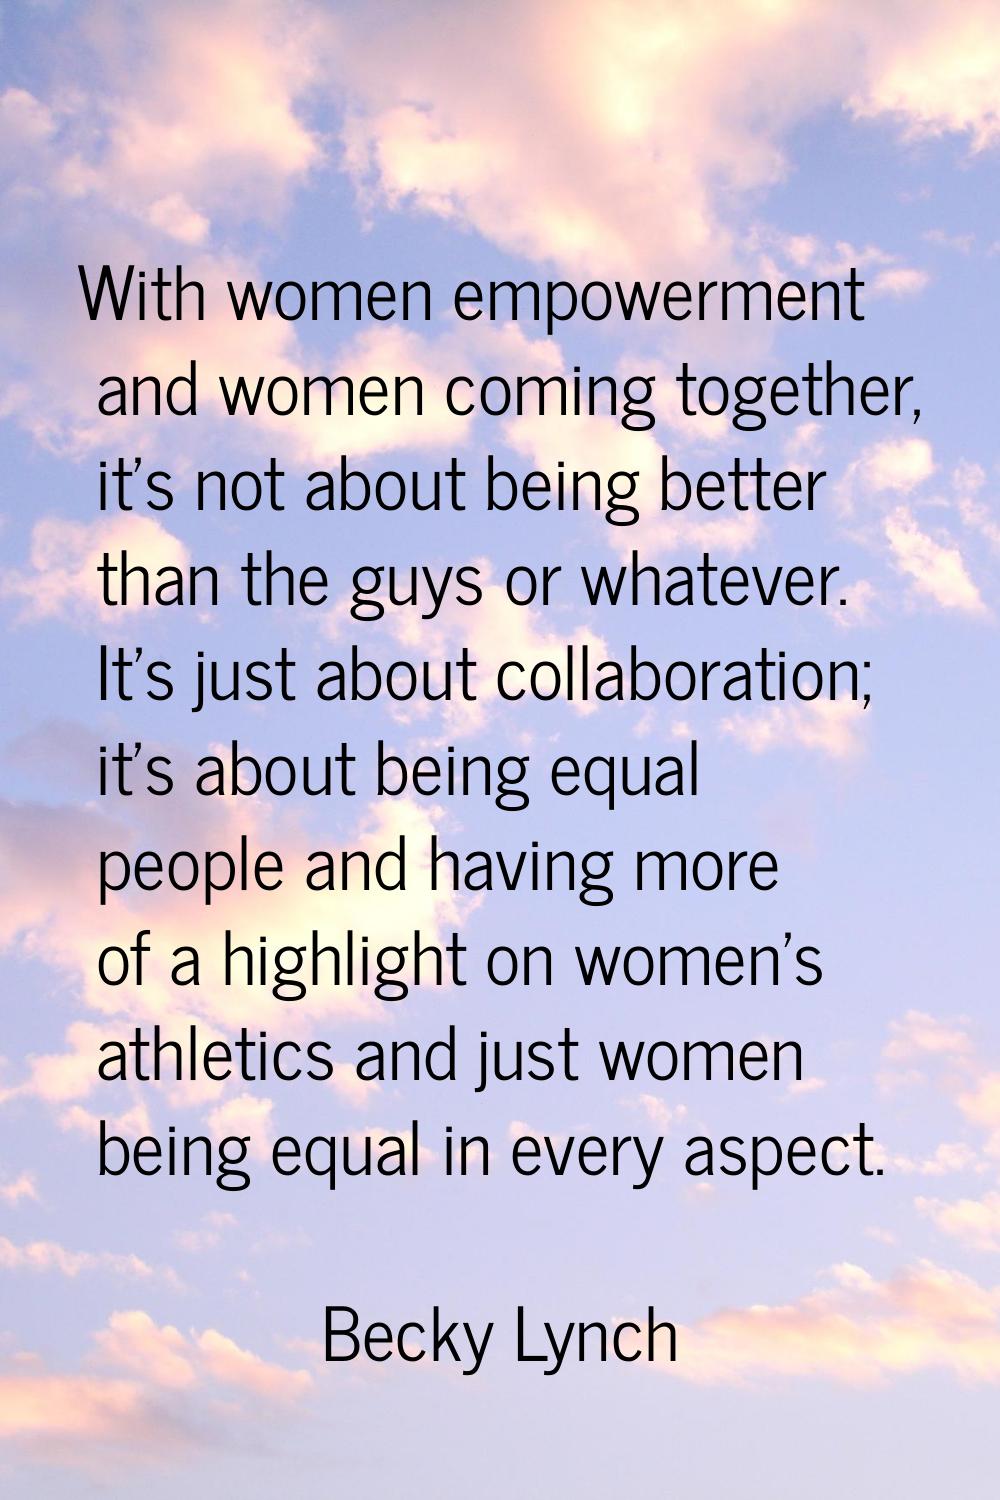 With women empowerment and women coming together, it's not about being better than the guys or what